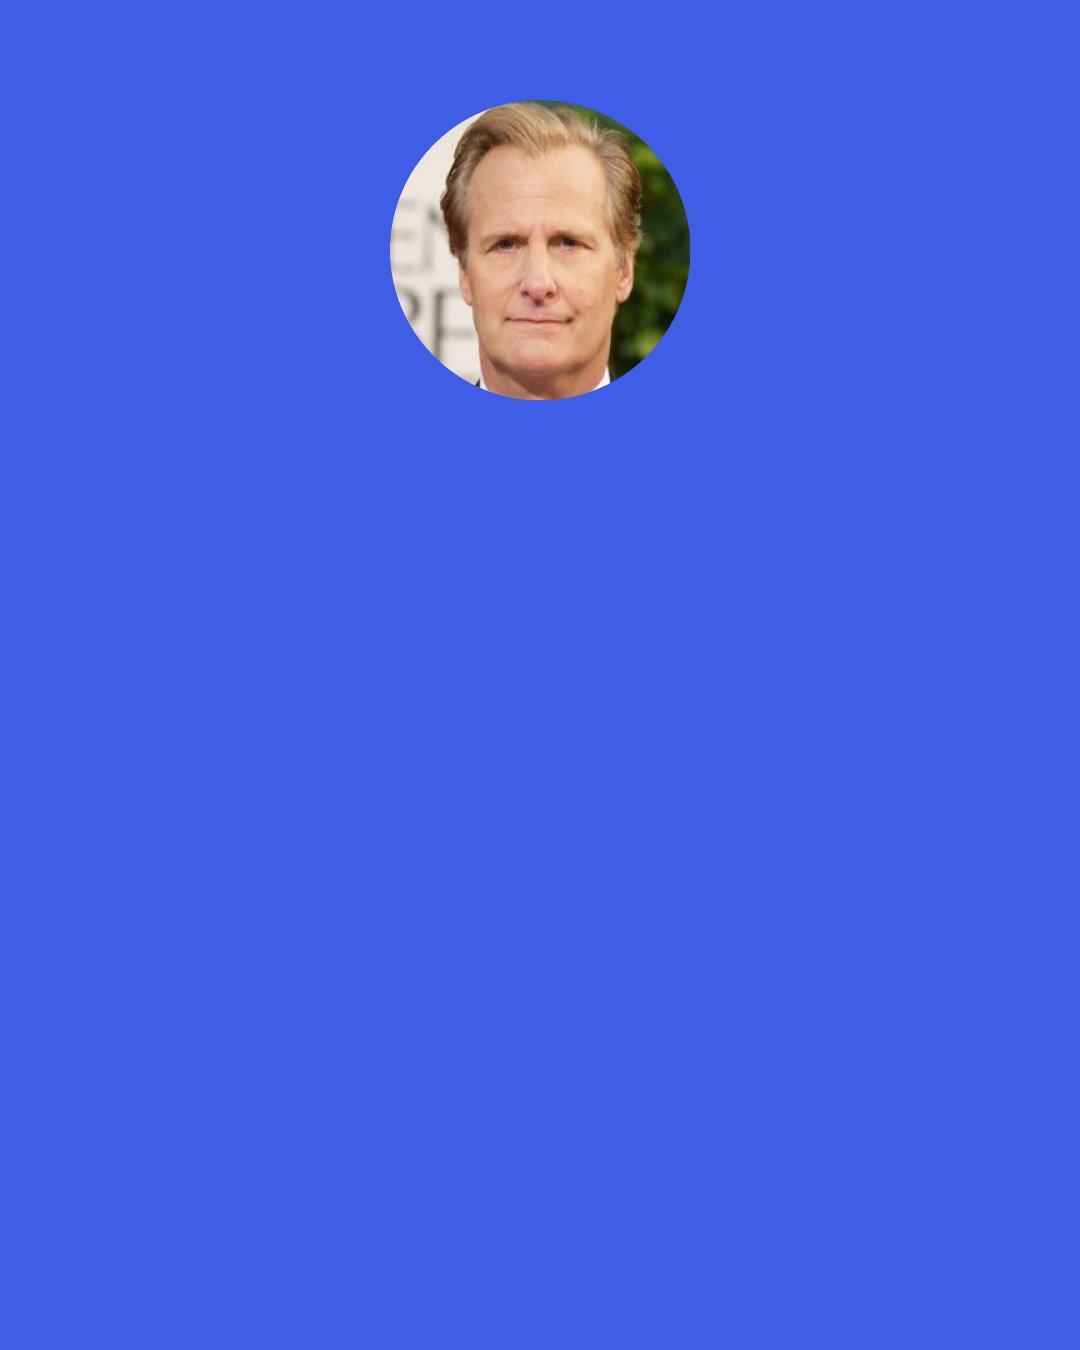 Jeff Daniels: I was haunted by trainers going "Up, up, up, get up." You find yourself picking your head up and then realizing, They aren't talking to me.